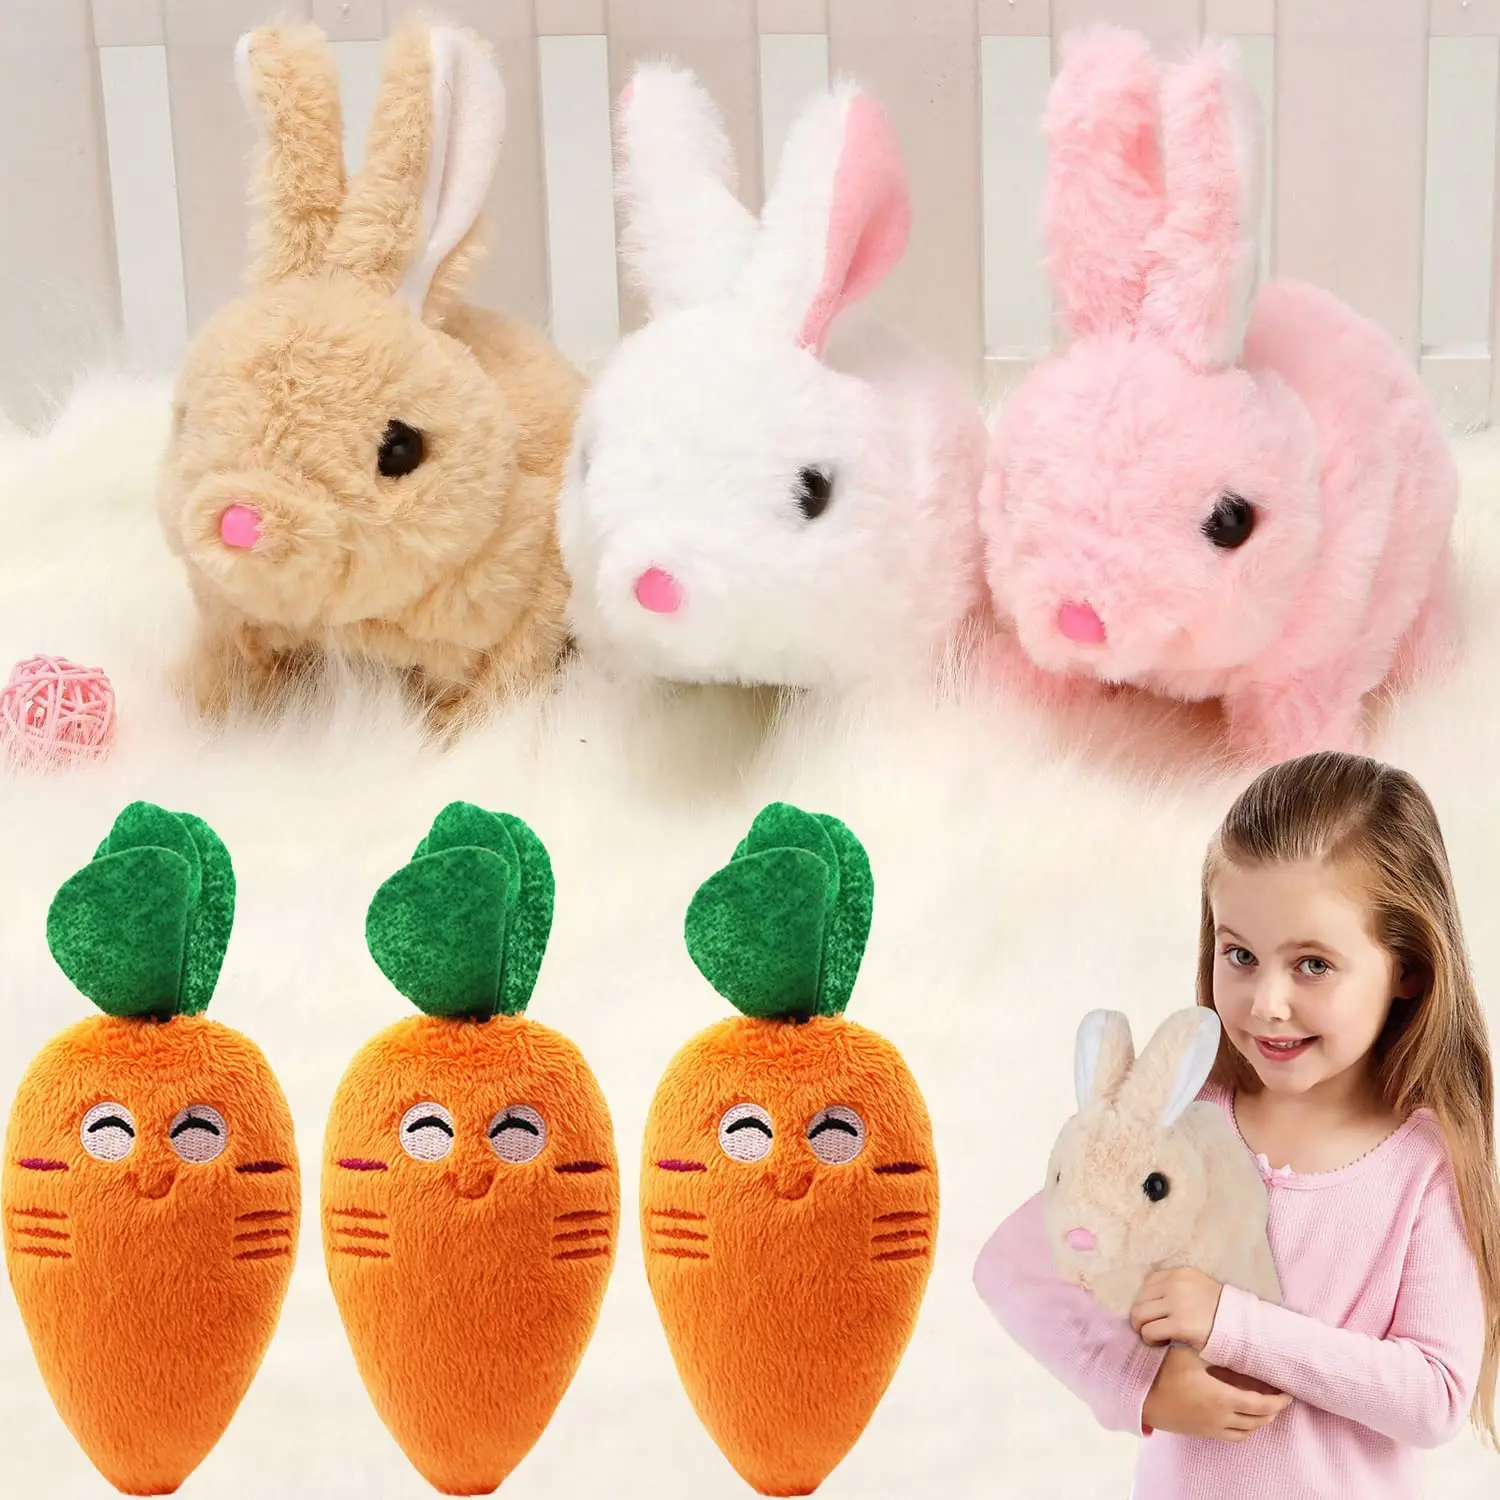 Bunny Toys Educational Interactive Toys Bunnies Can Walk and Talk, Easter Plush Stuffed Bunny Toy Walking Rabbit Educational Toy electronic bunny toy plush rabbit toy with sounds and movements walking wiggle ears twitch nose easter birthday gift for boys